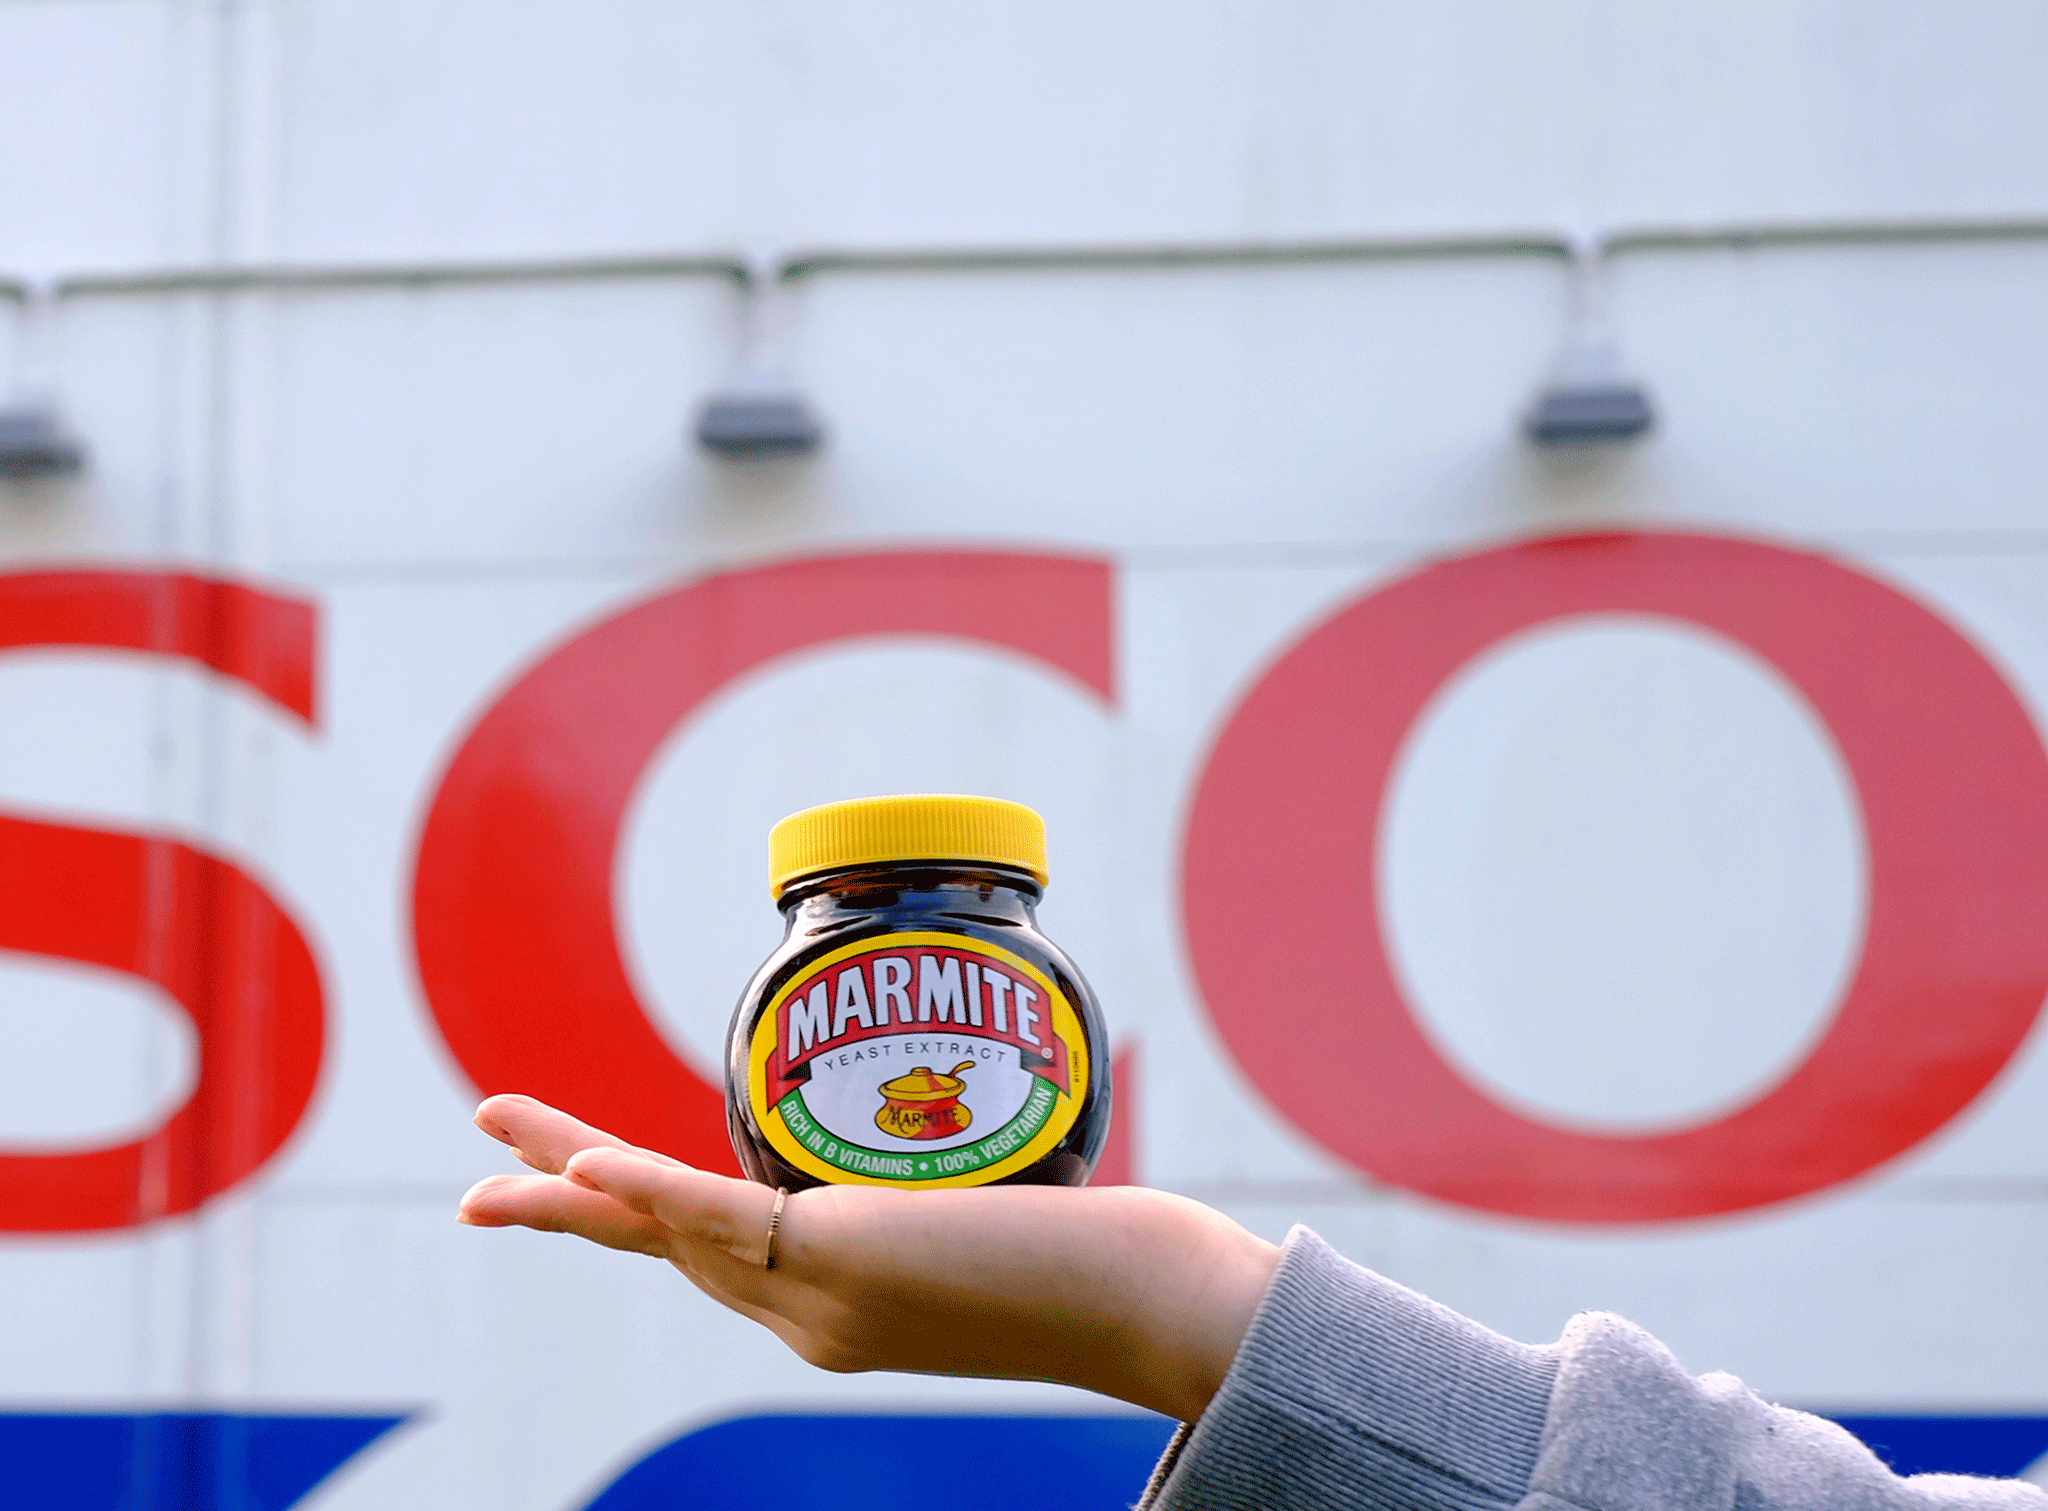 Tesco refused to capitulate after Unilever demanded a price hike for some of its most loved brands, including Marmite